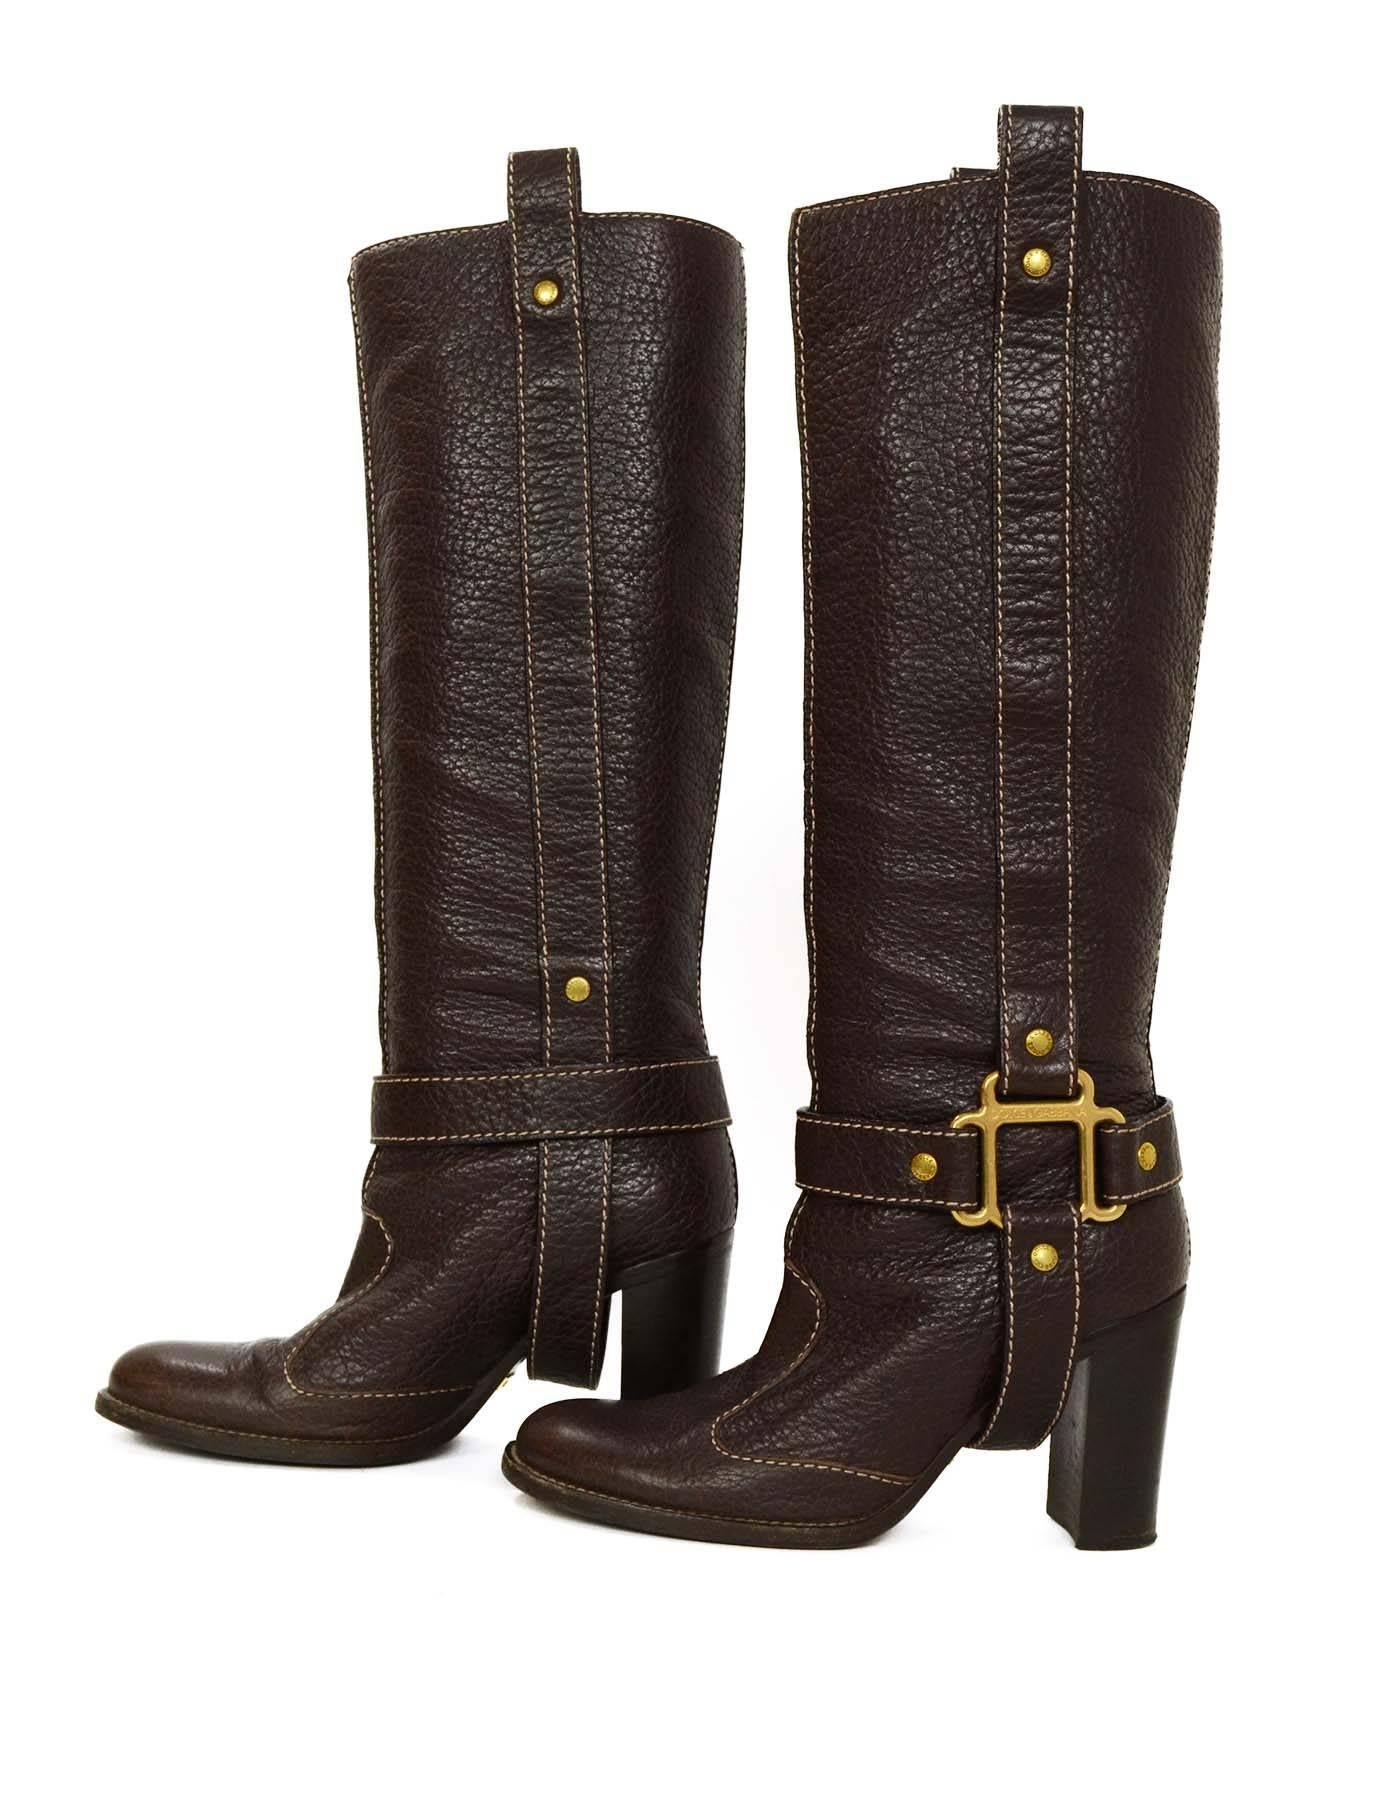 Black Dolce & Gabbana Brown Leather Tall Boots sz 35